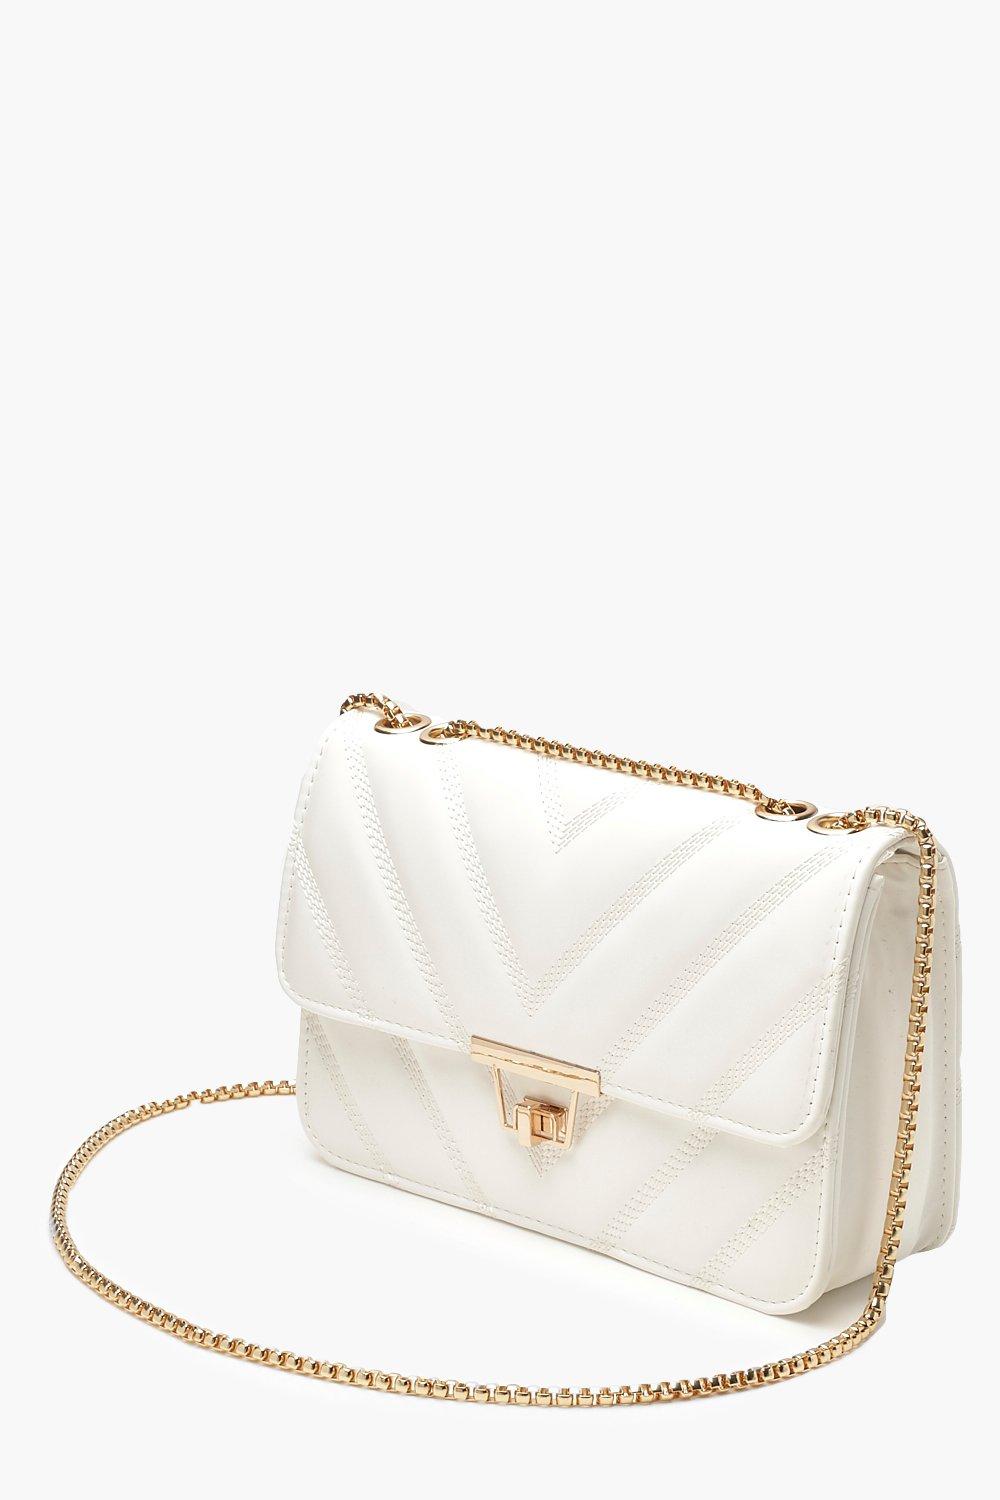 Buy Small White Purse Y2k Crossbody Purses Quilted Crossbody Bags